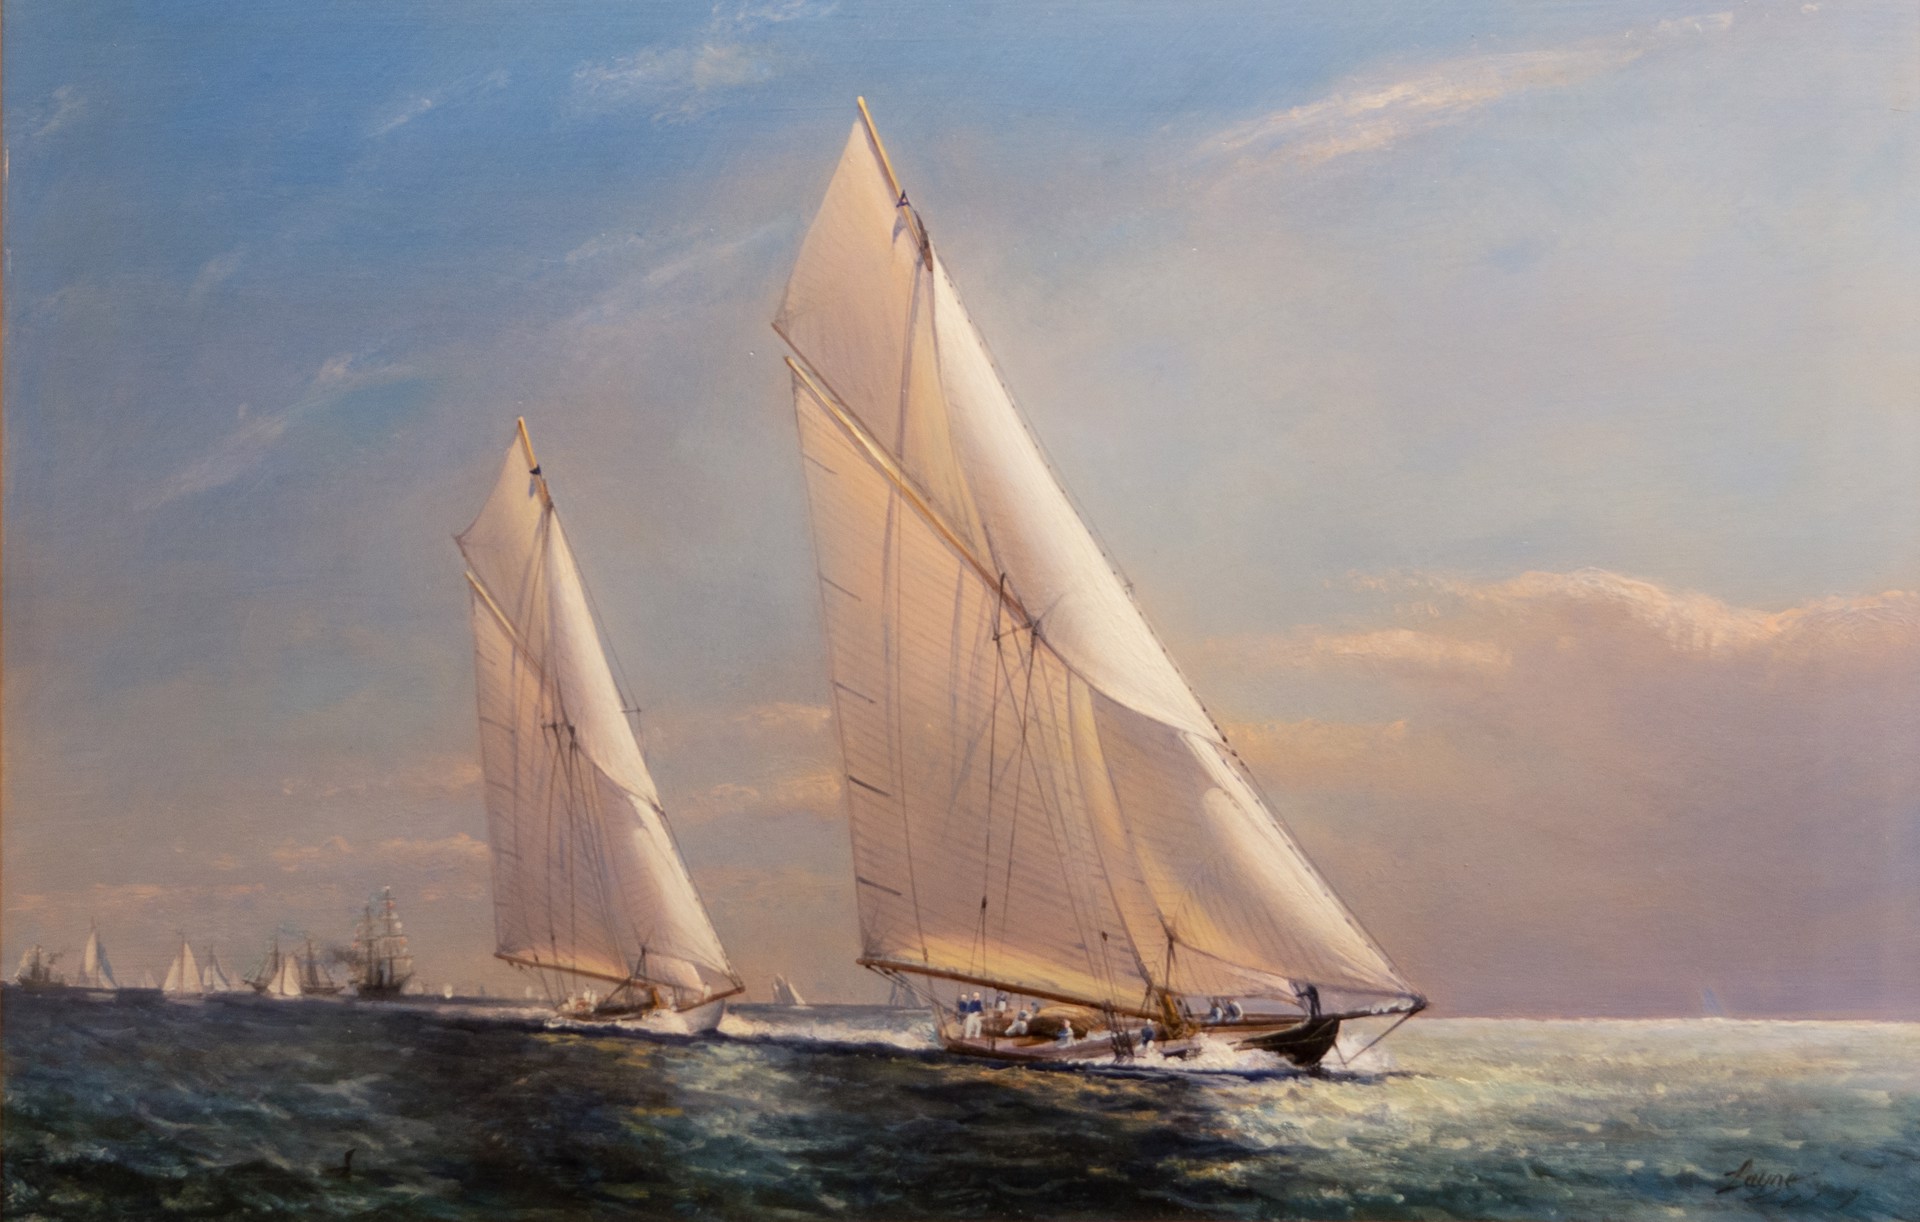 America's Cup by Peter Layne Arguimbau